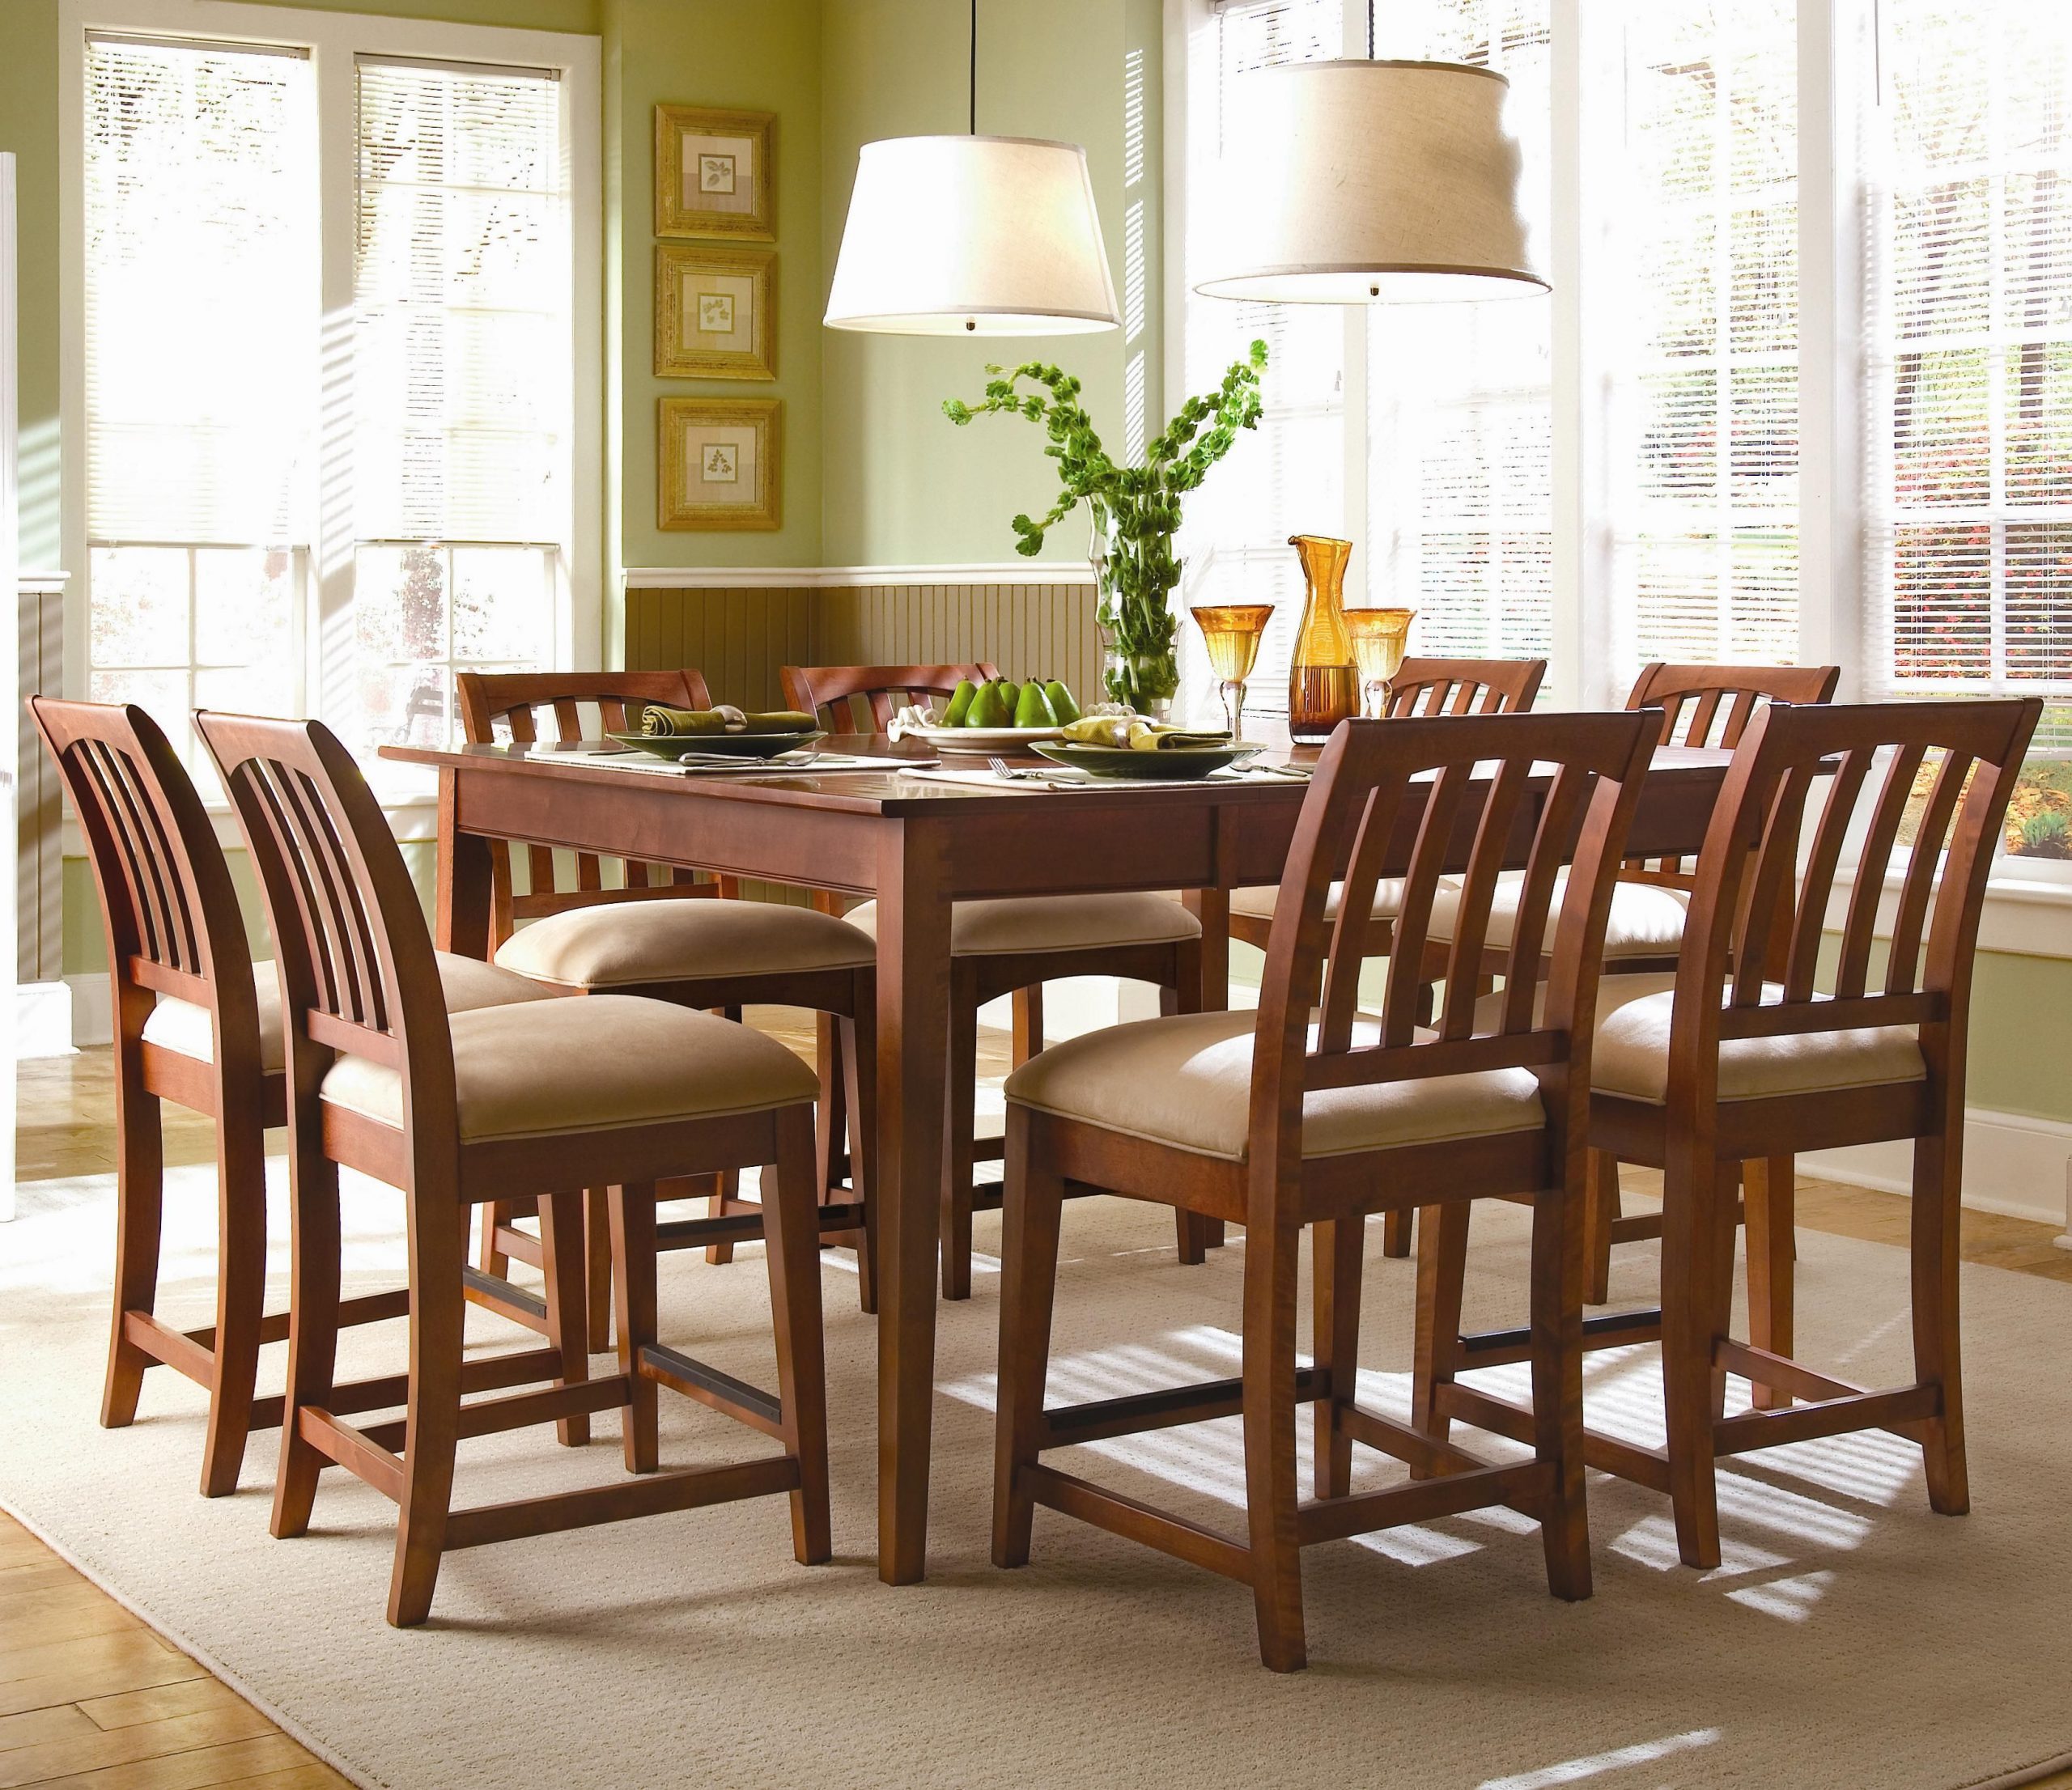 Gathering House 9 Piece Tall Dining Set Kincaid Furniture intended for sizing 3292 X 2844